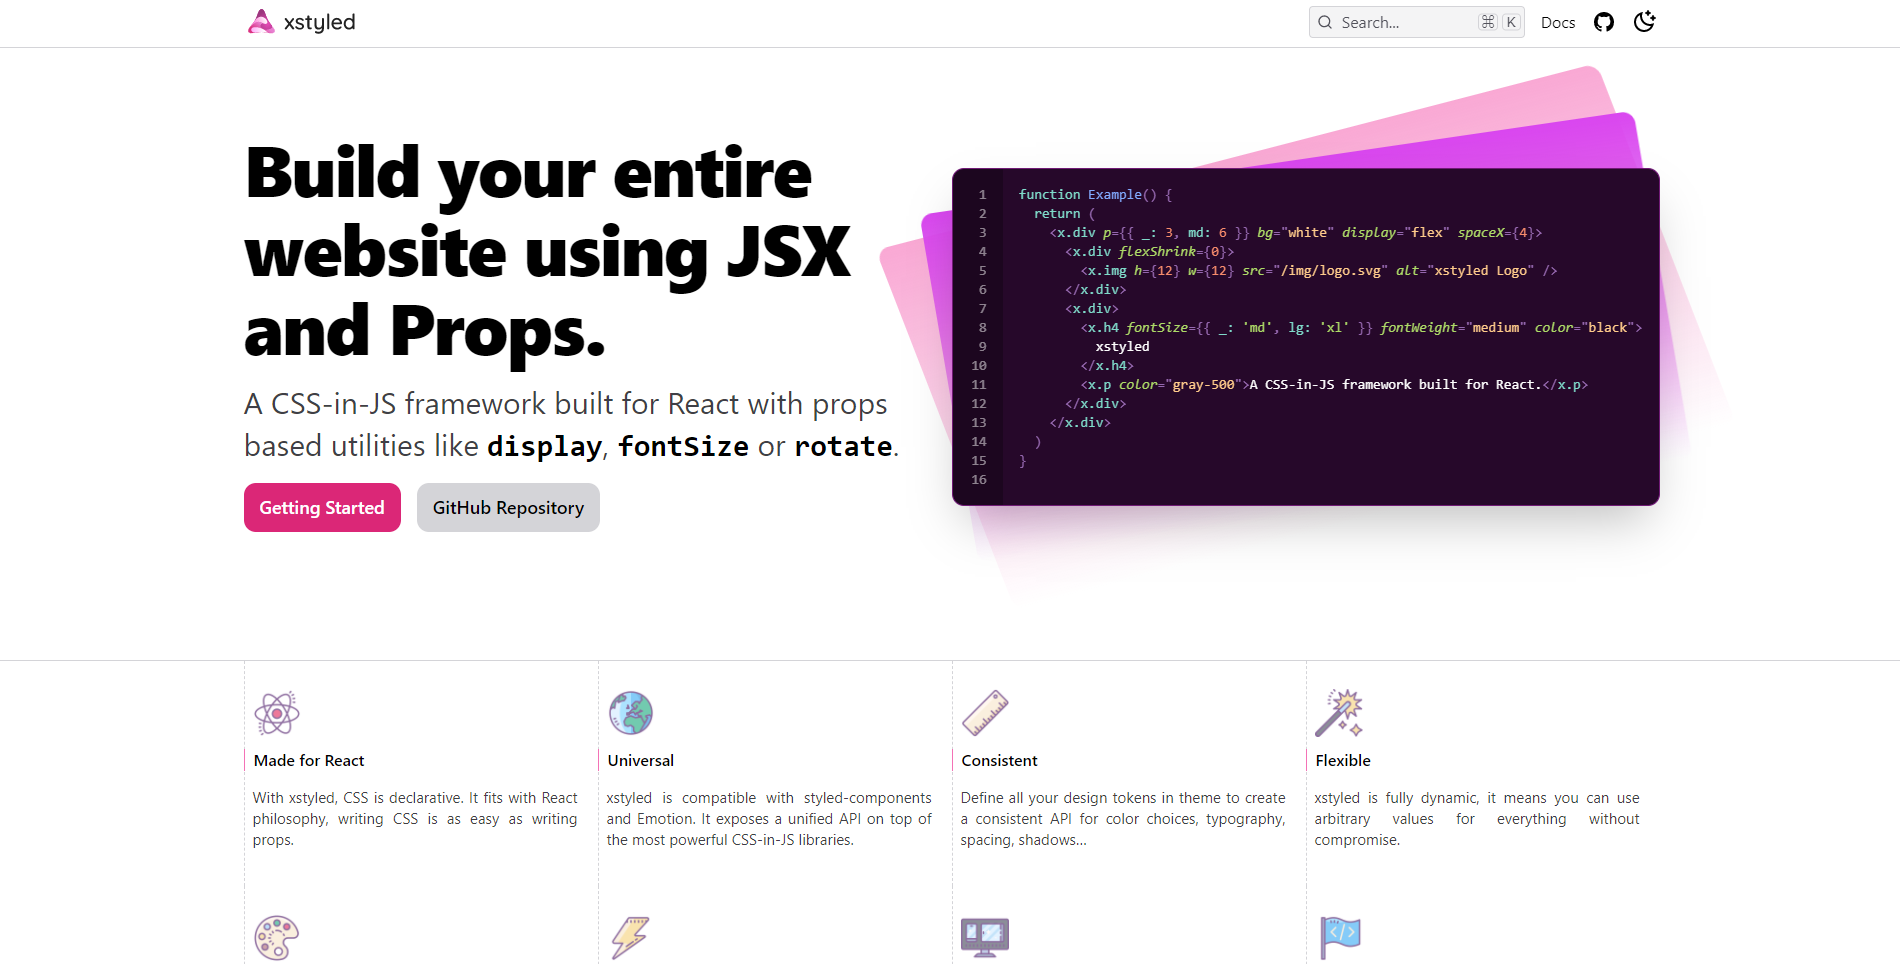 XStyled landing page